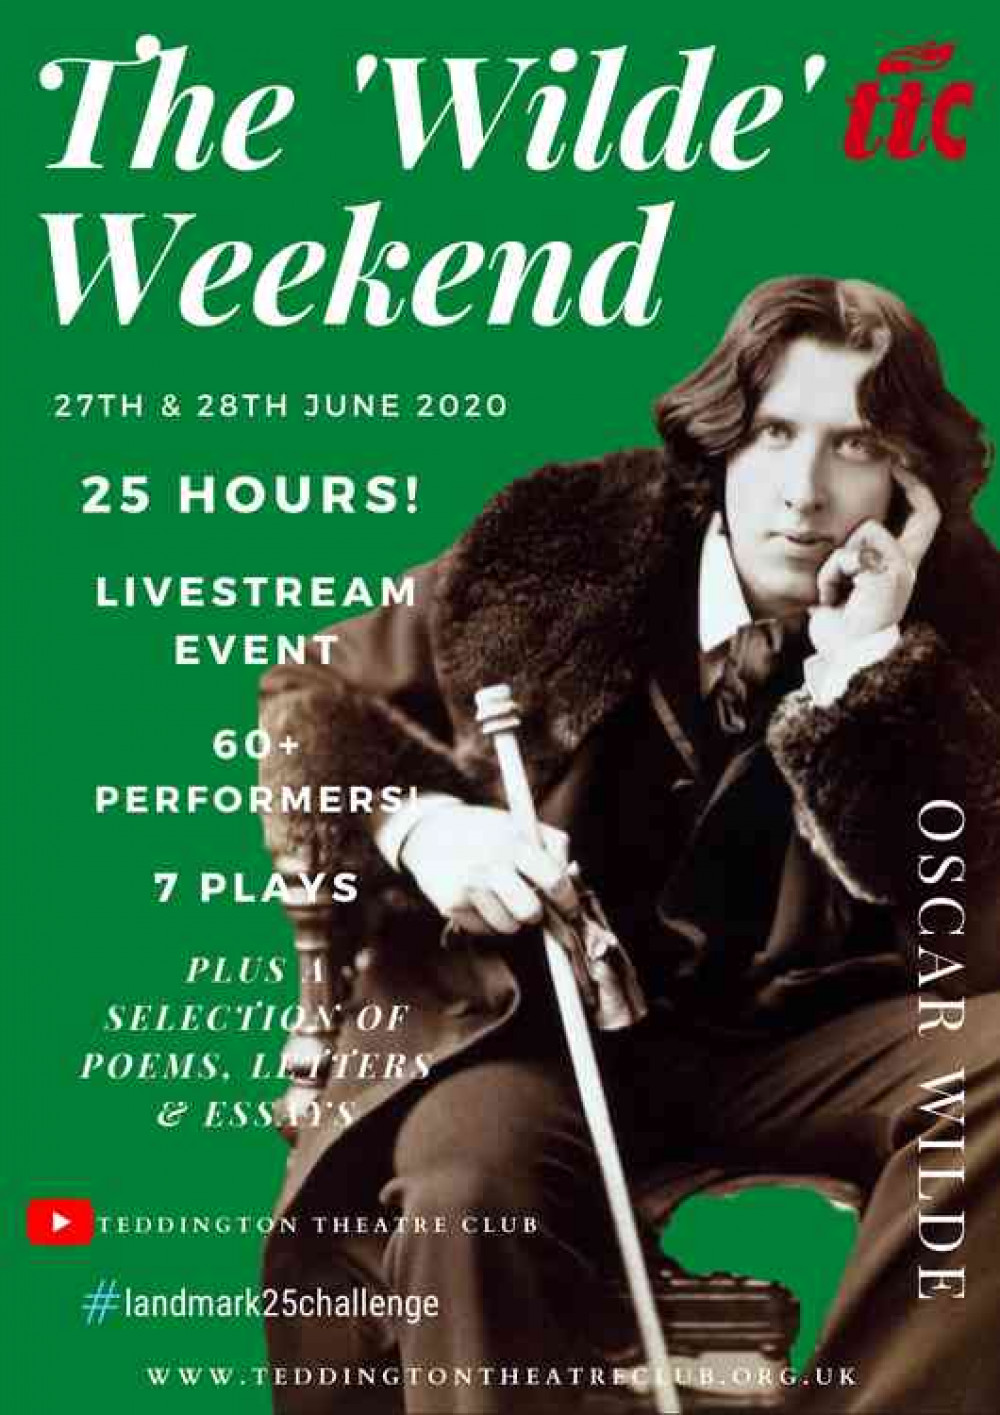 The Wilde Weekend Poster